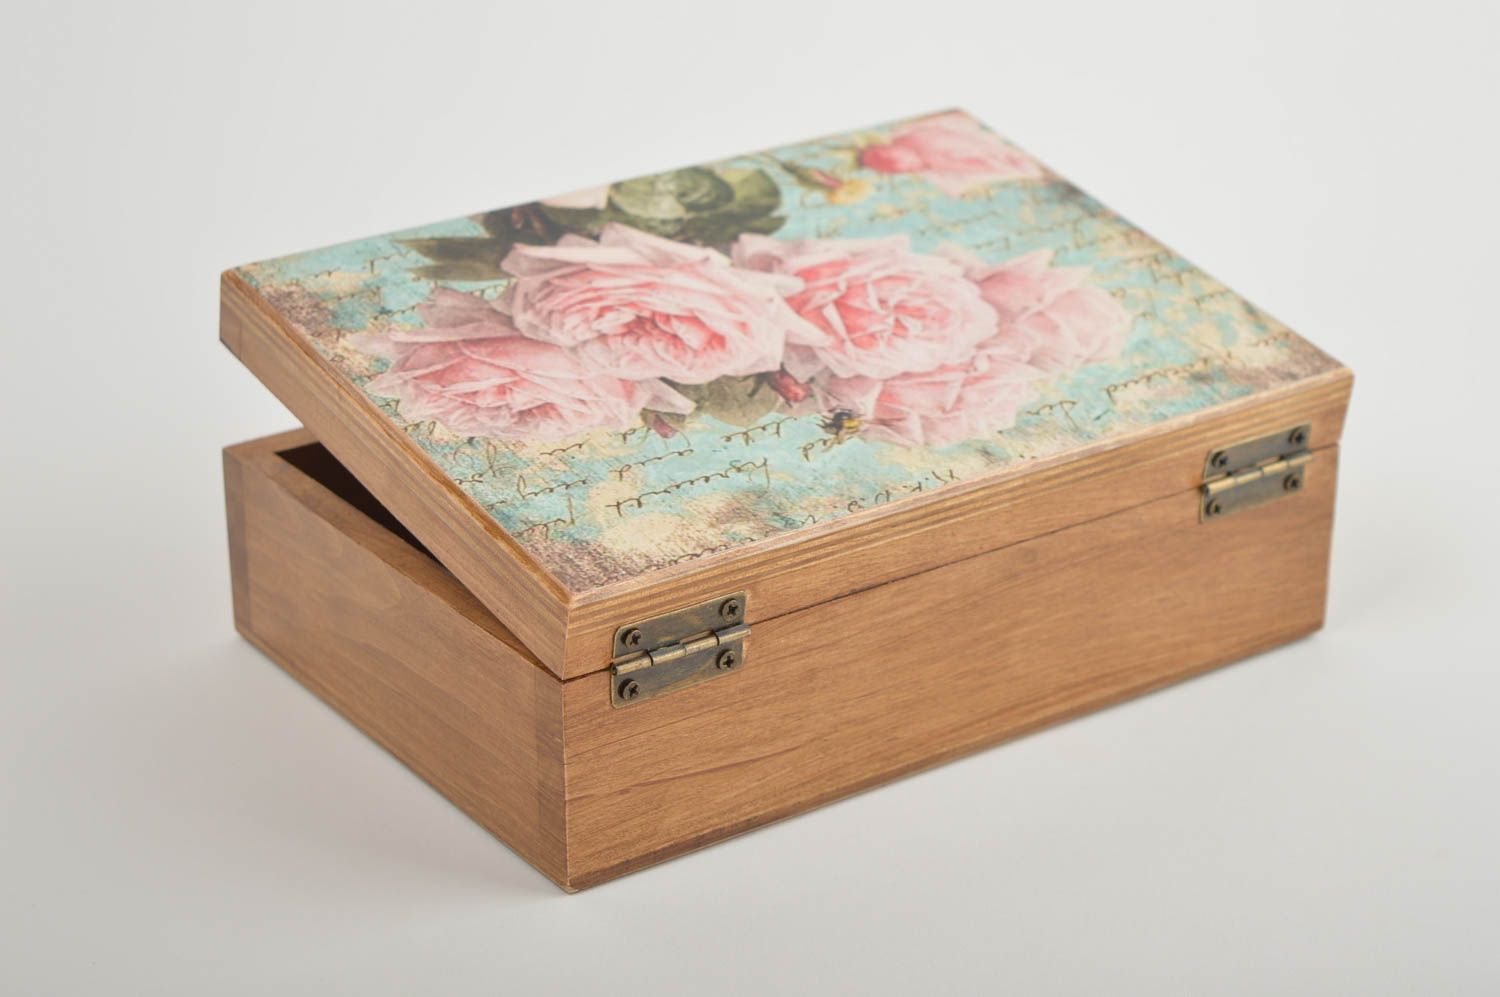 Handmade jewelry box wooden jewelry gift boxes gifts for women home decor photo 3